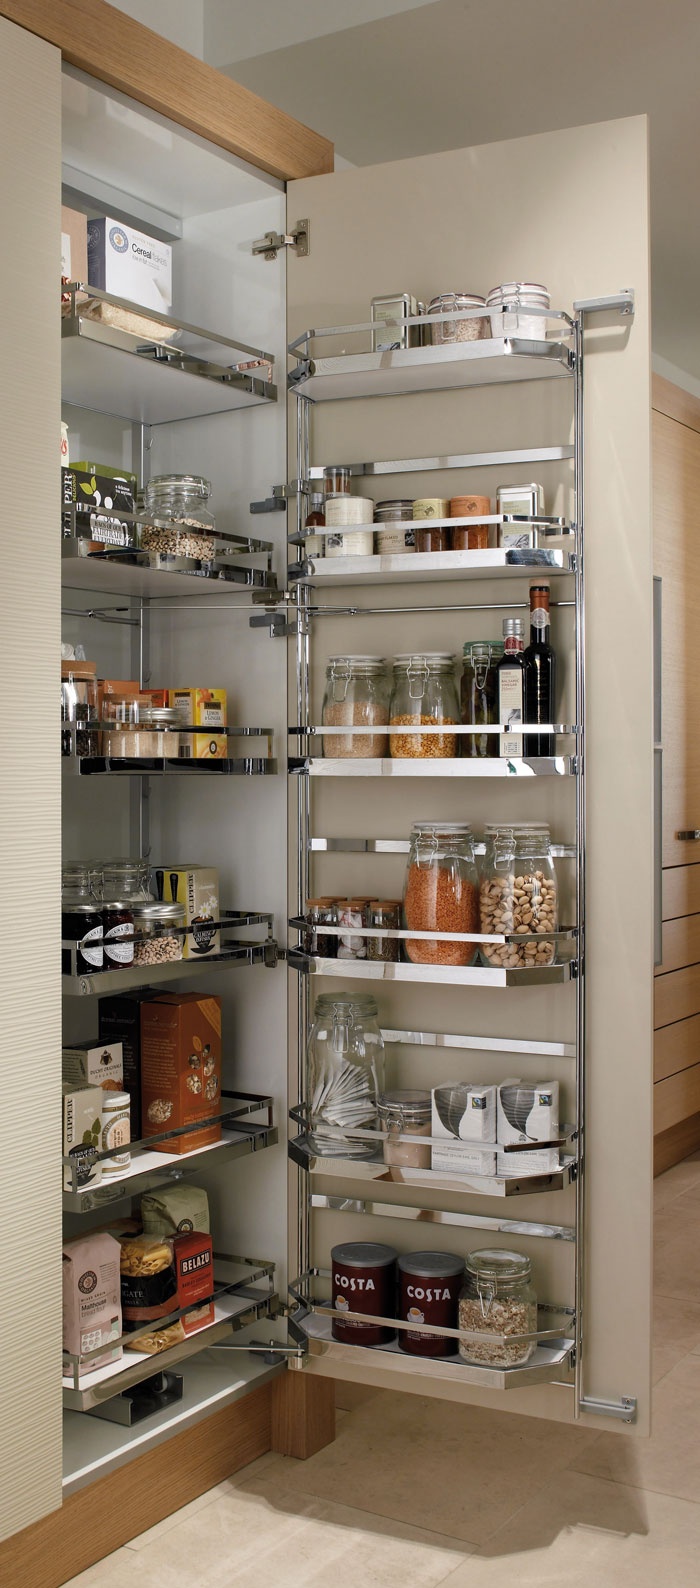 A pull-out larder